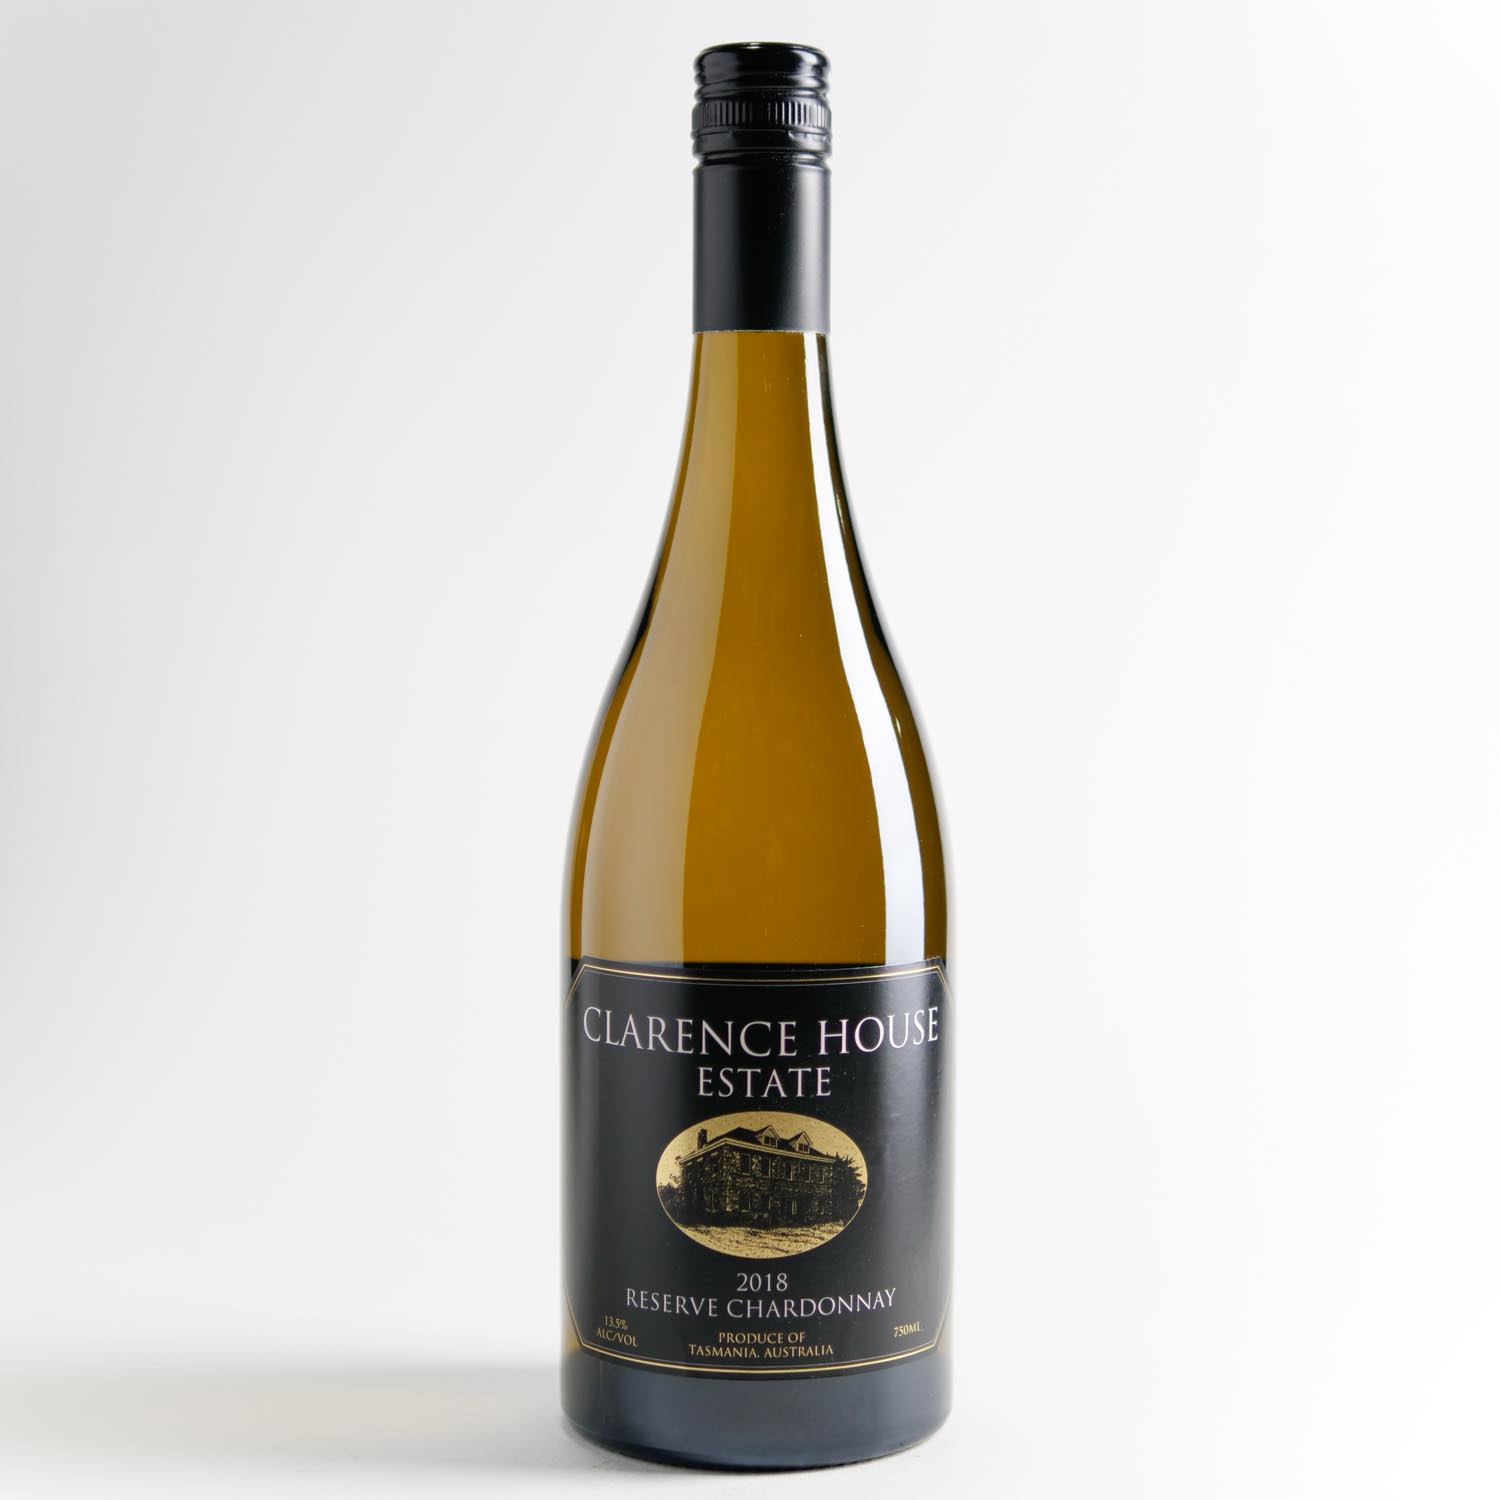 Clarence House Reserve Chardonnay 2018